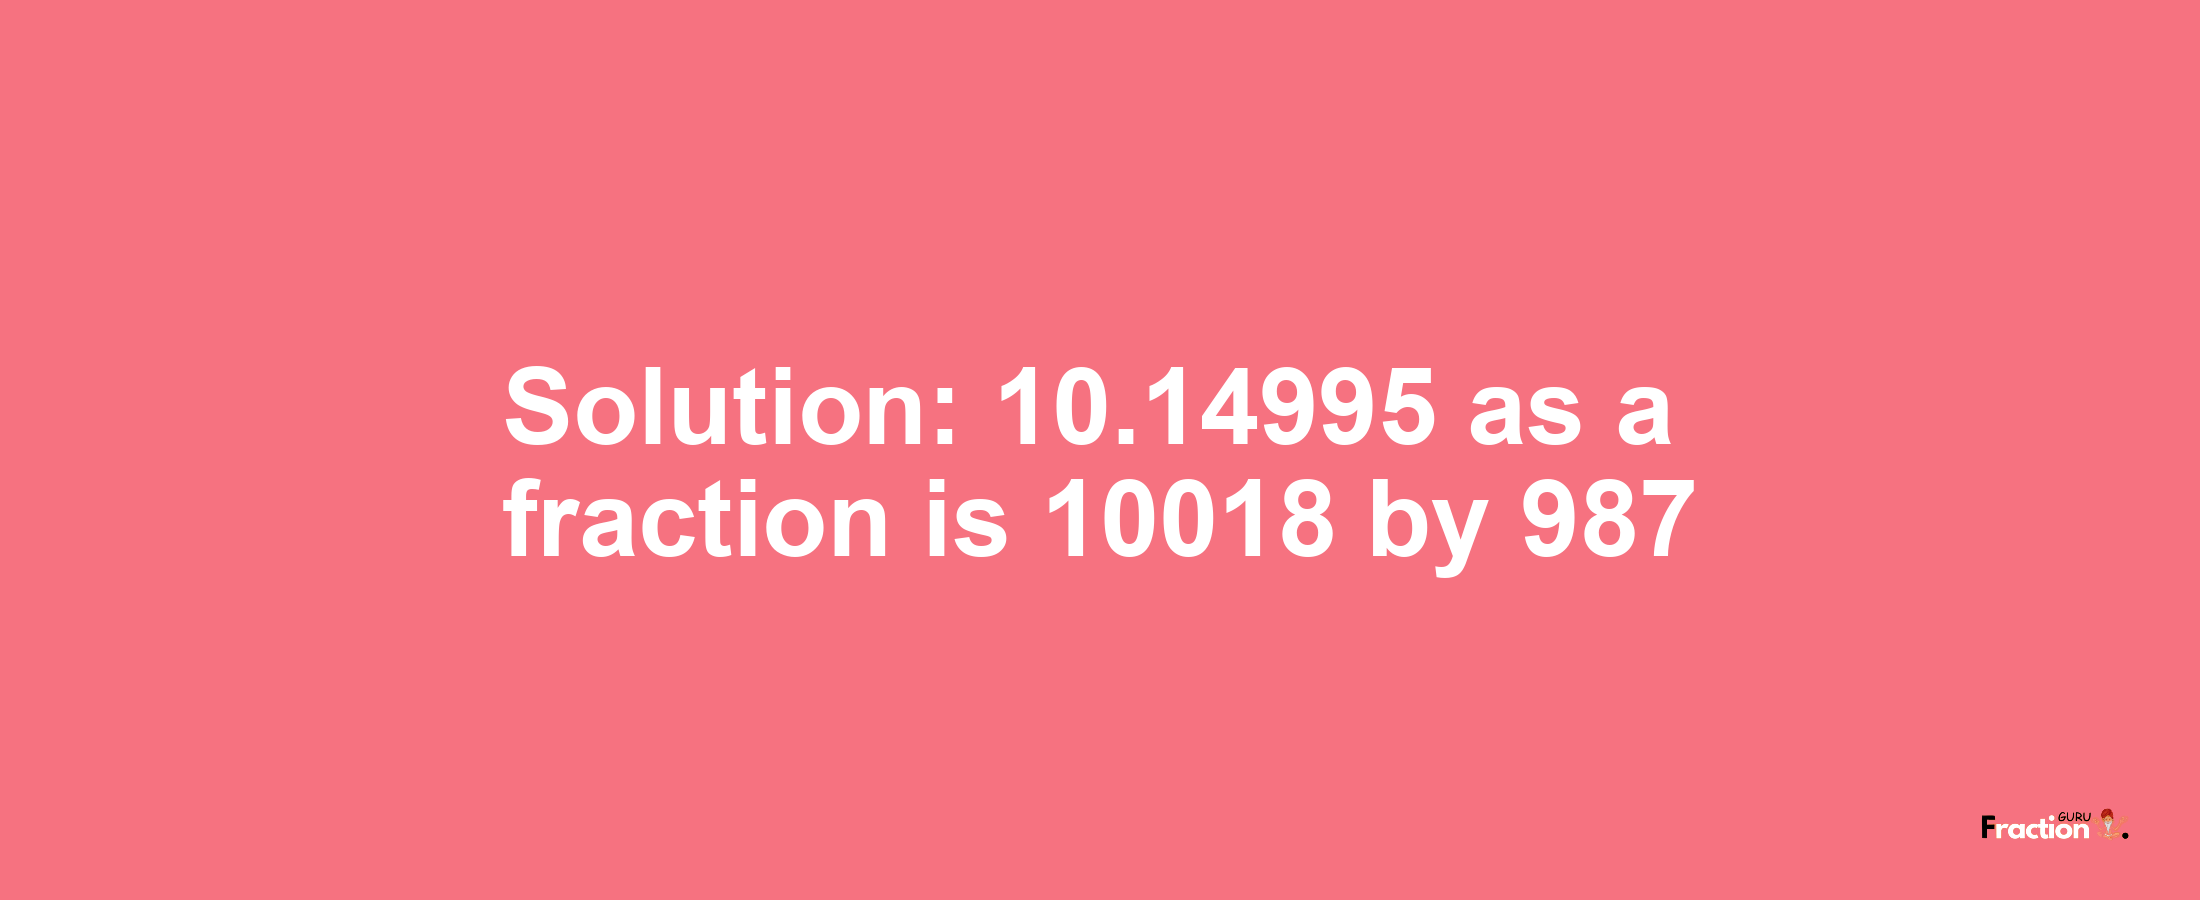 Solution:10.14995 as a fraction is 10018/987